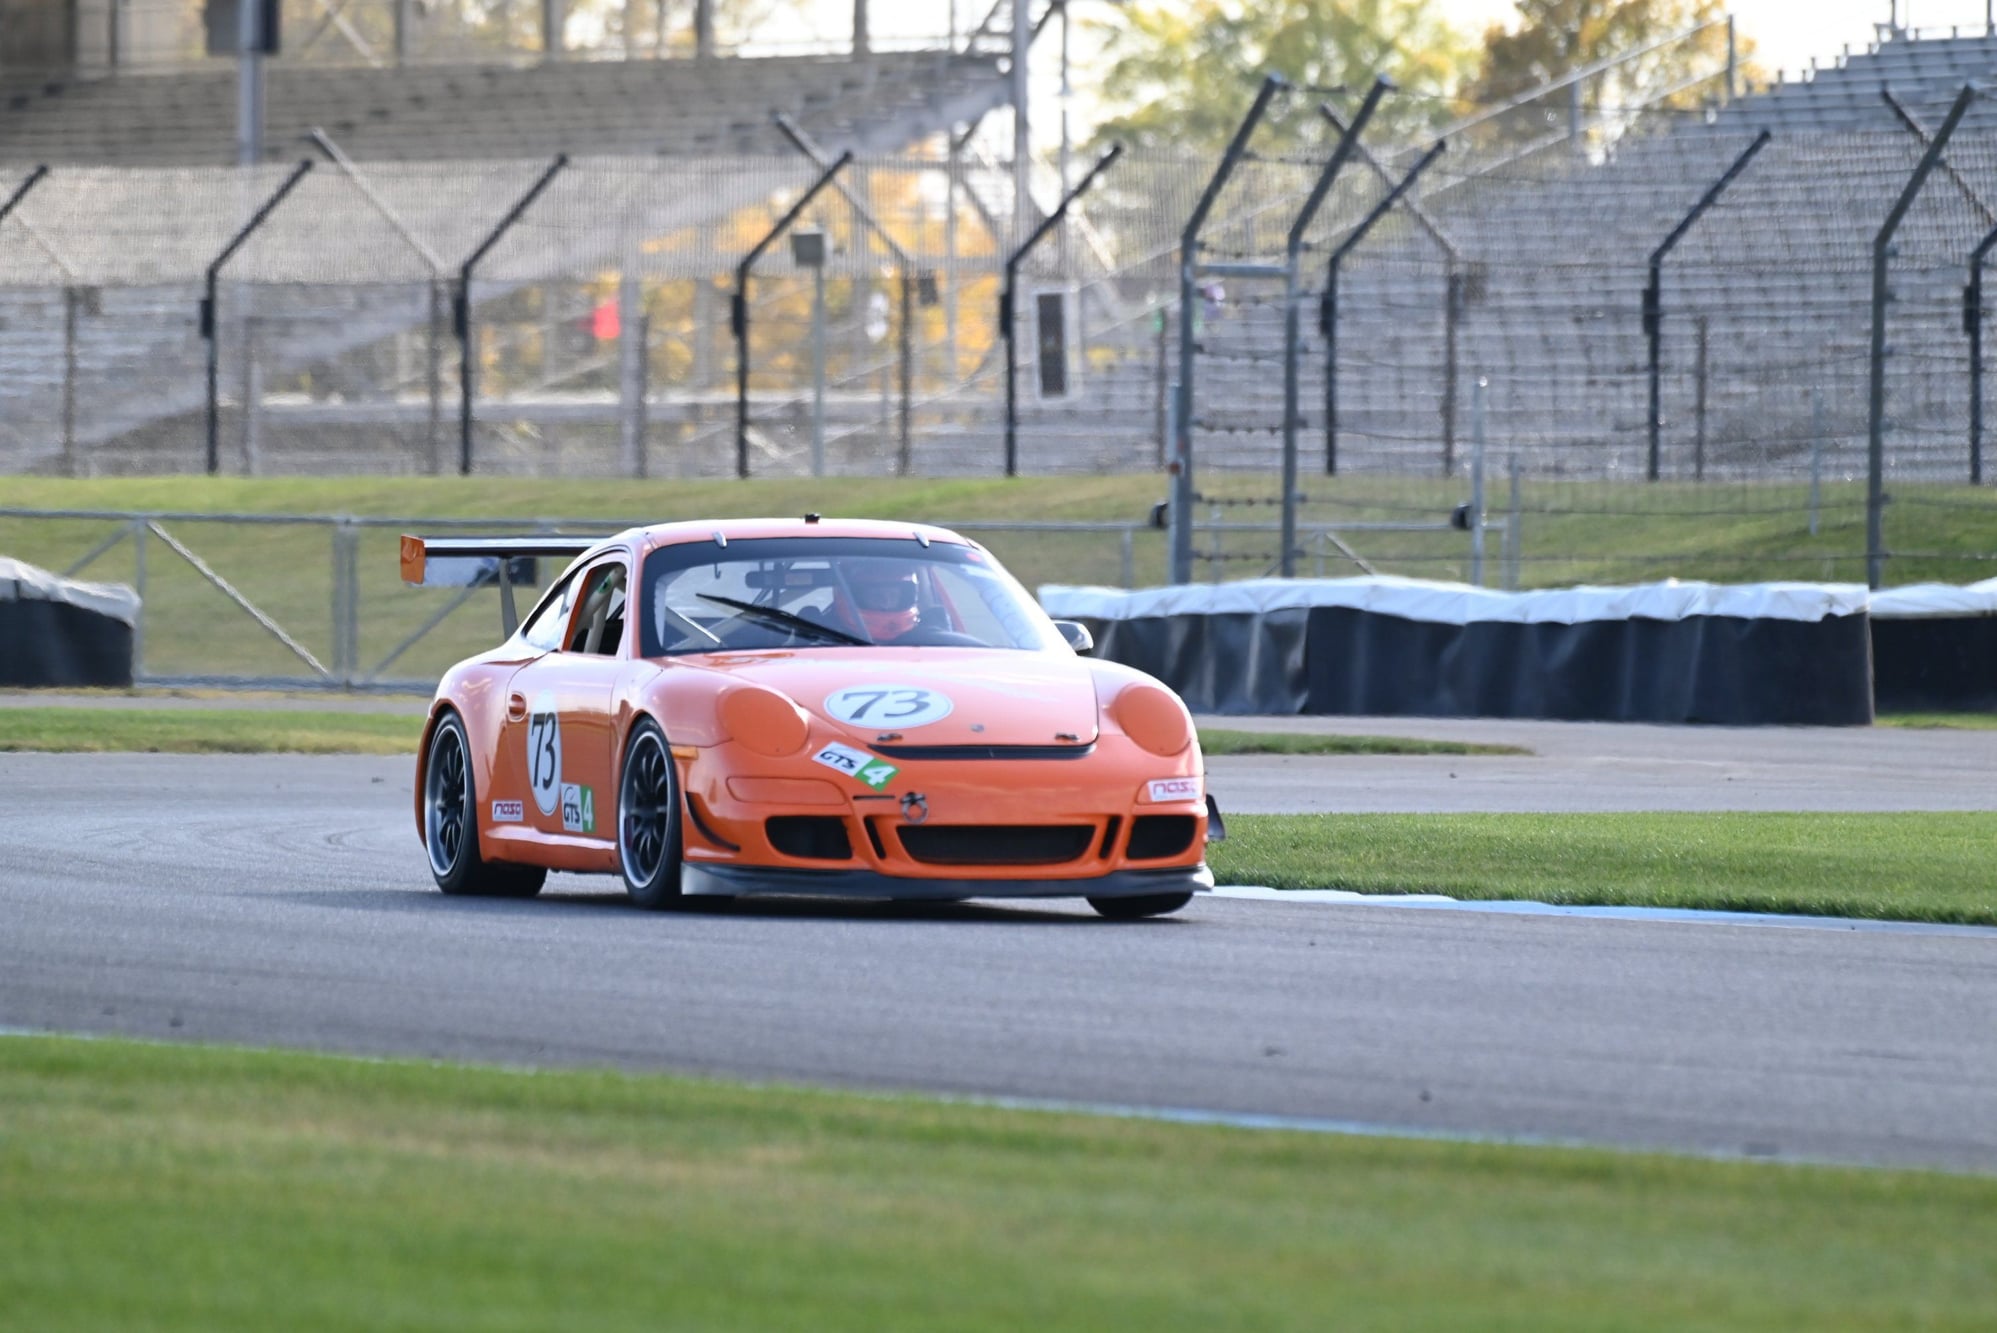 2006 Porsche 911 - 997 Contiental Grand Am Race Car - Used - Columbus, OH 43221, United States